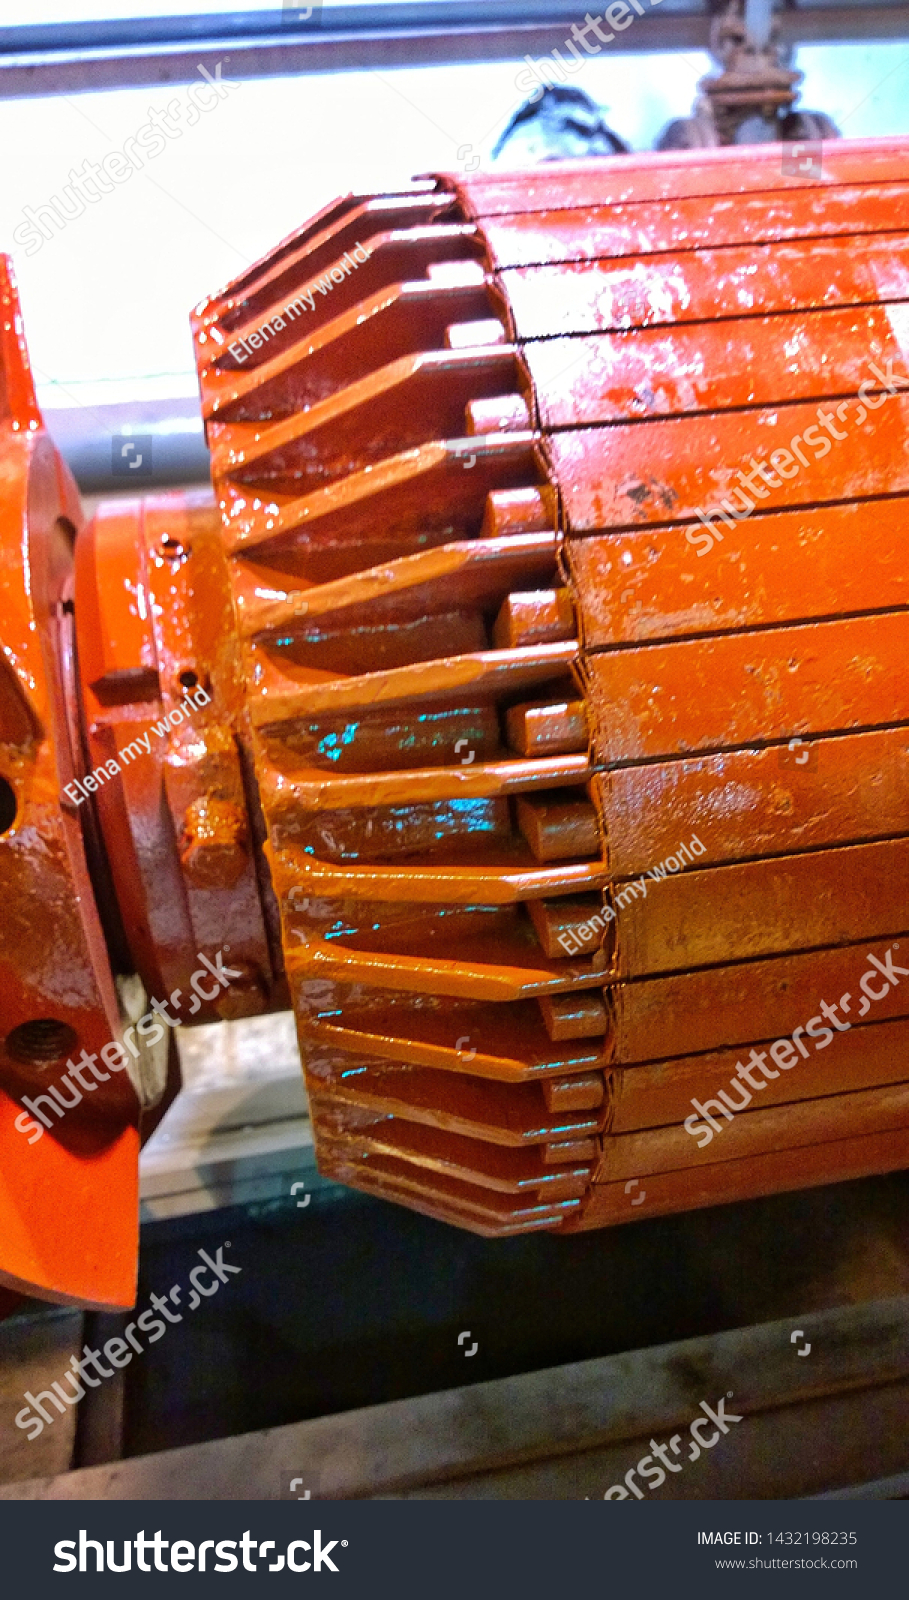 Repair and disassembly of the old electric motor. The electric motor rotor. Close up of electric motor maintenance work. #1432198235